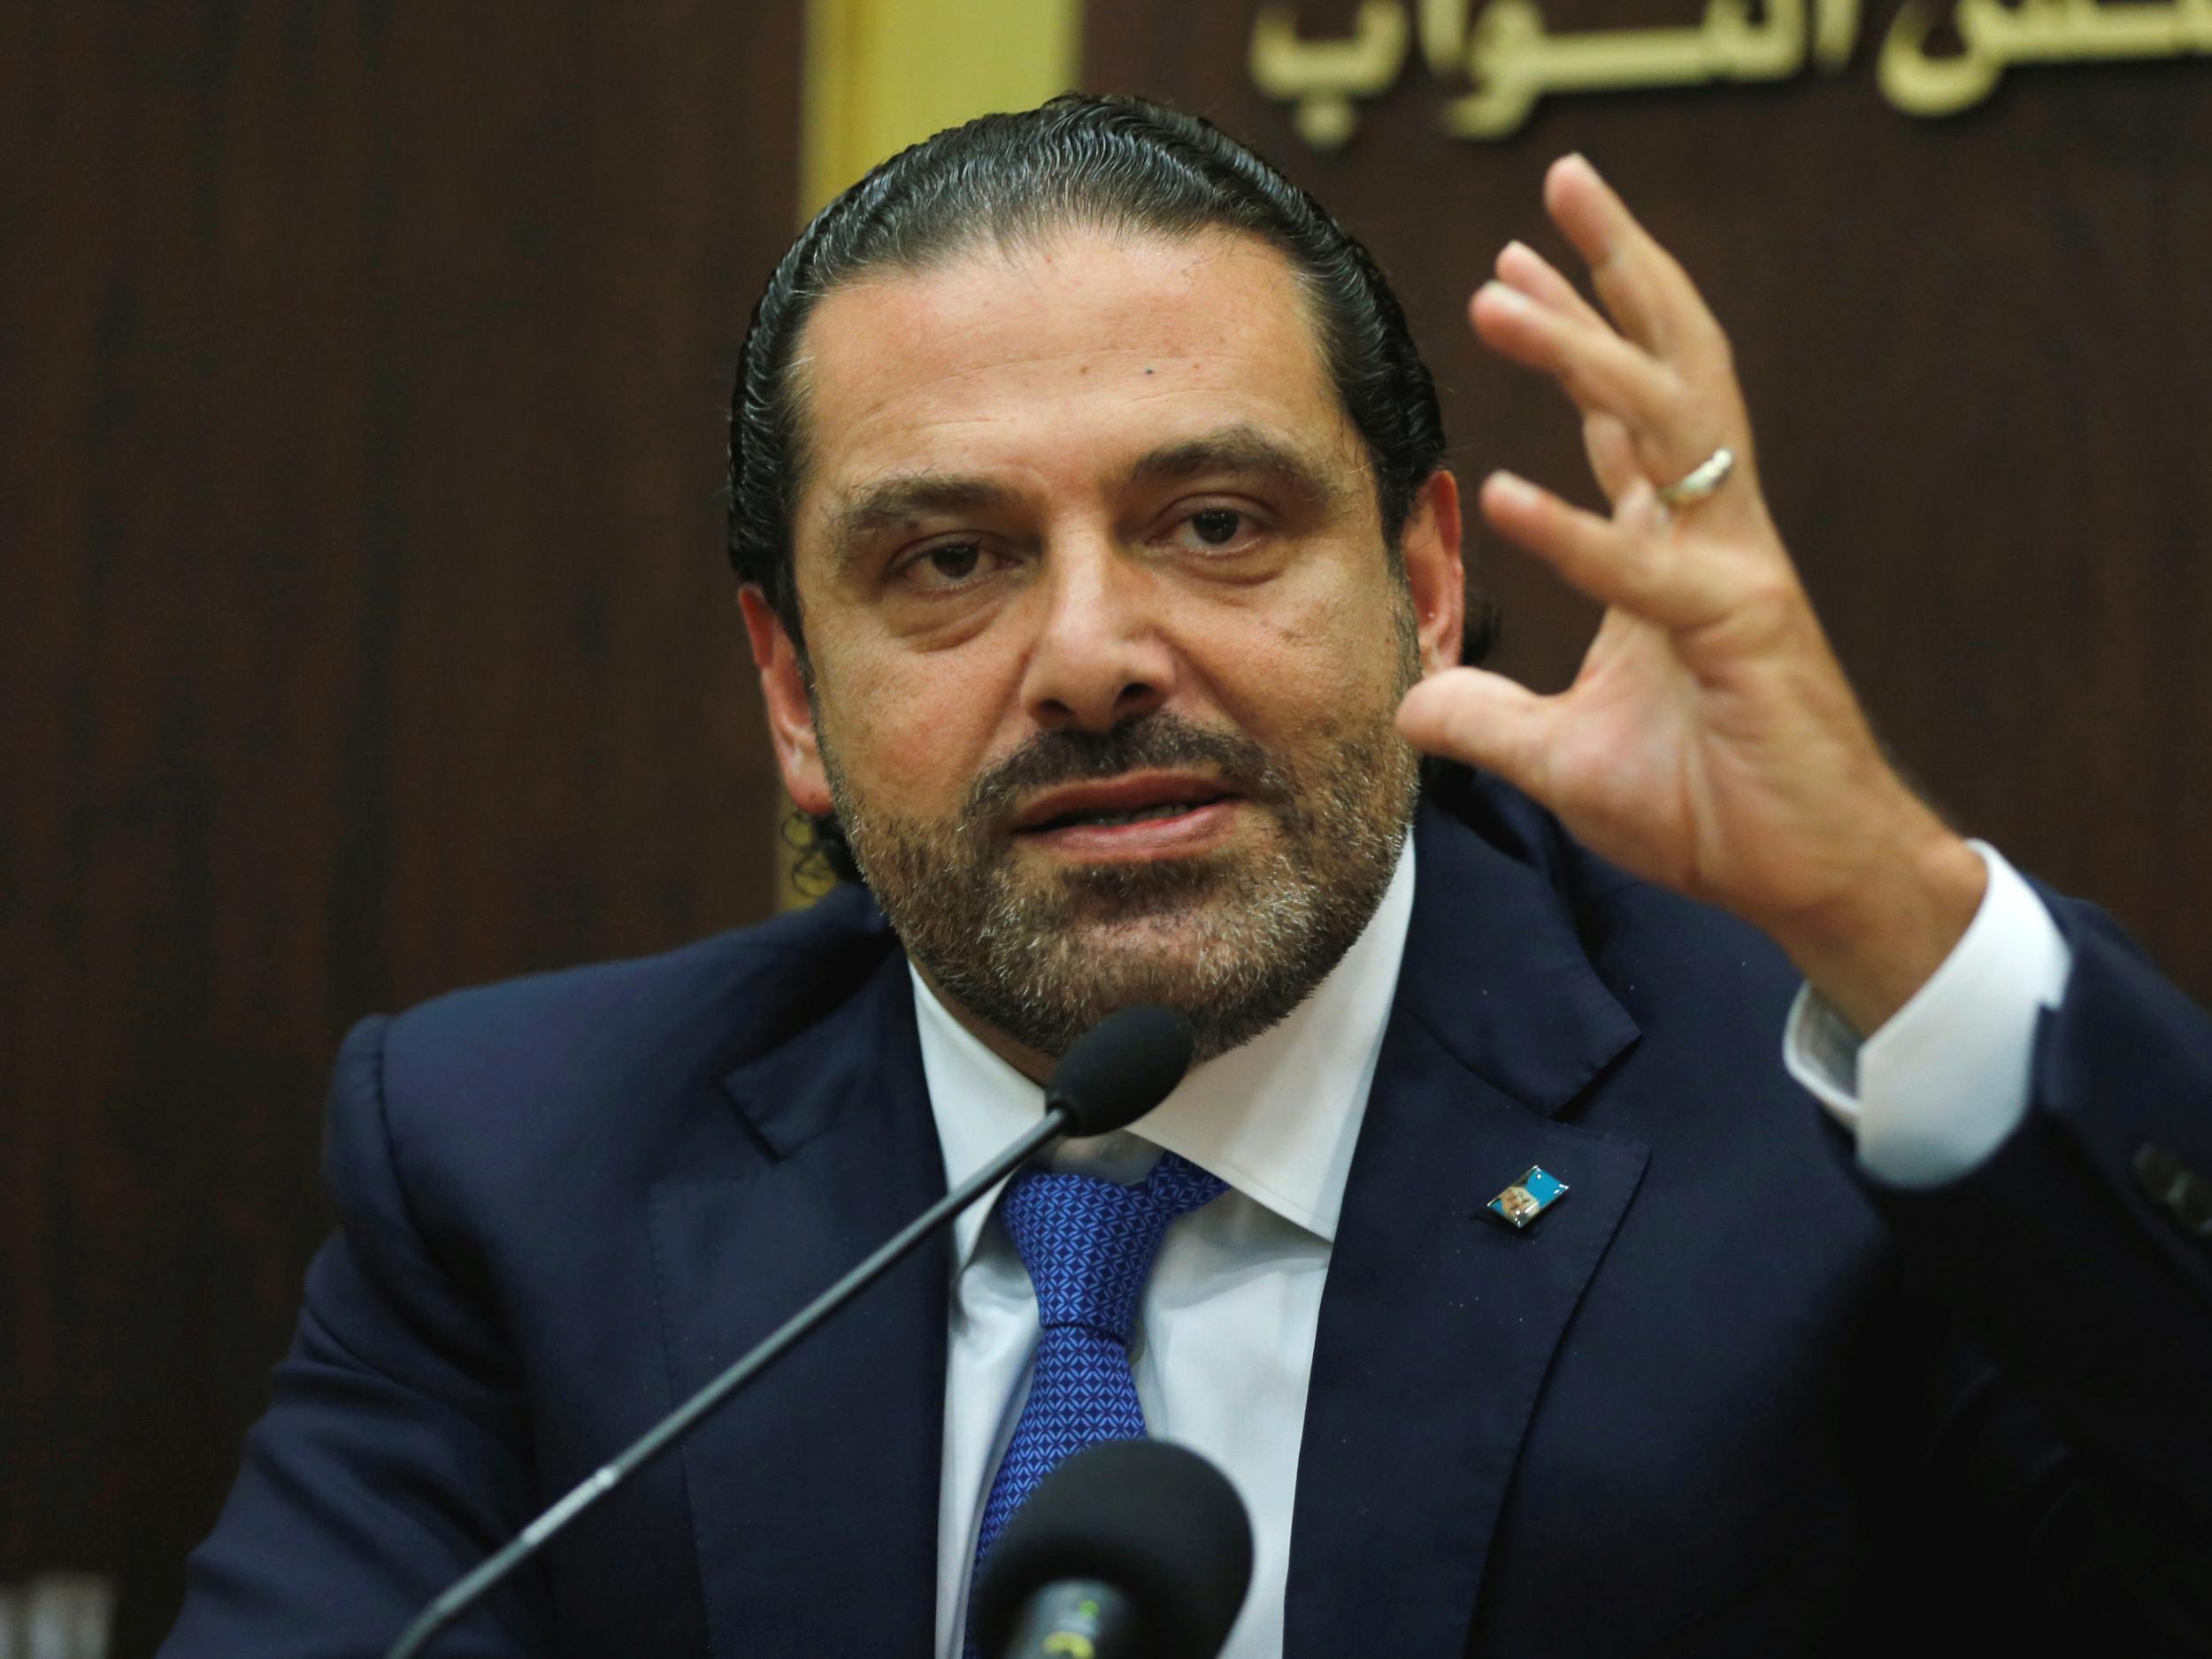 Lebanon's new cabinet to protect sovereignty: PM